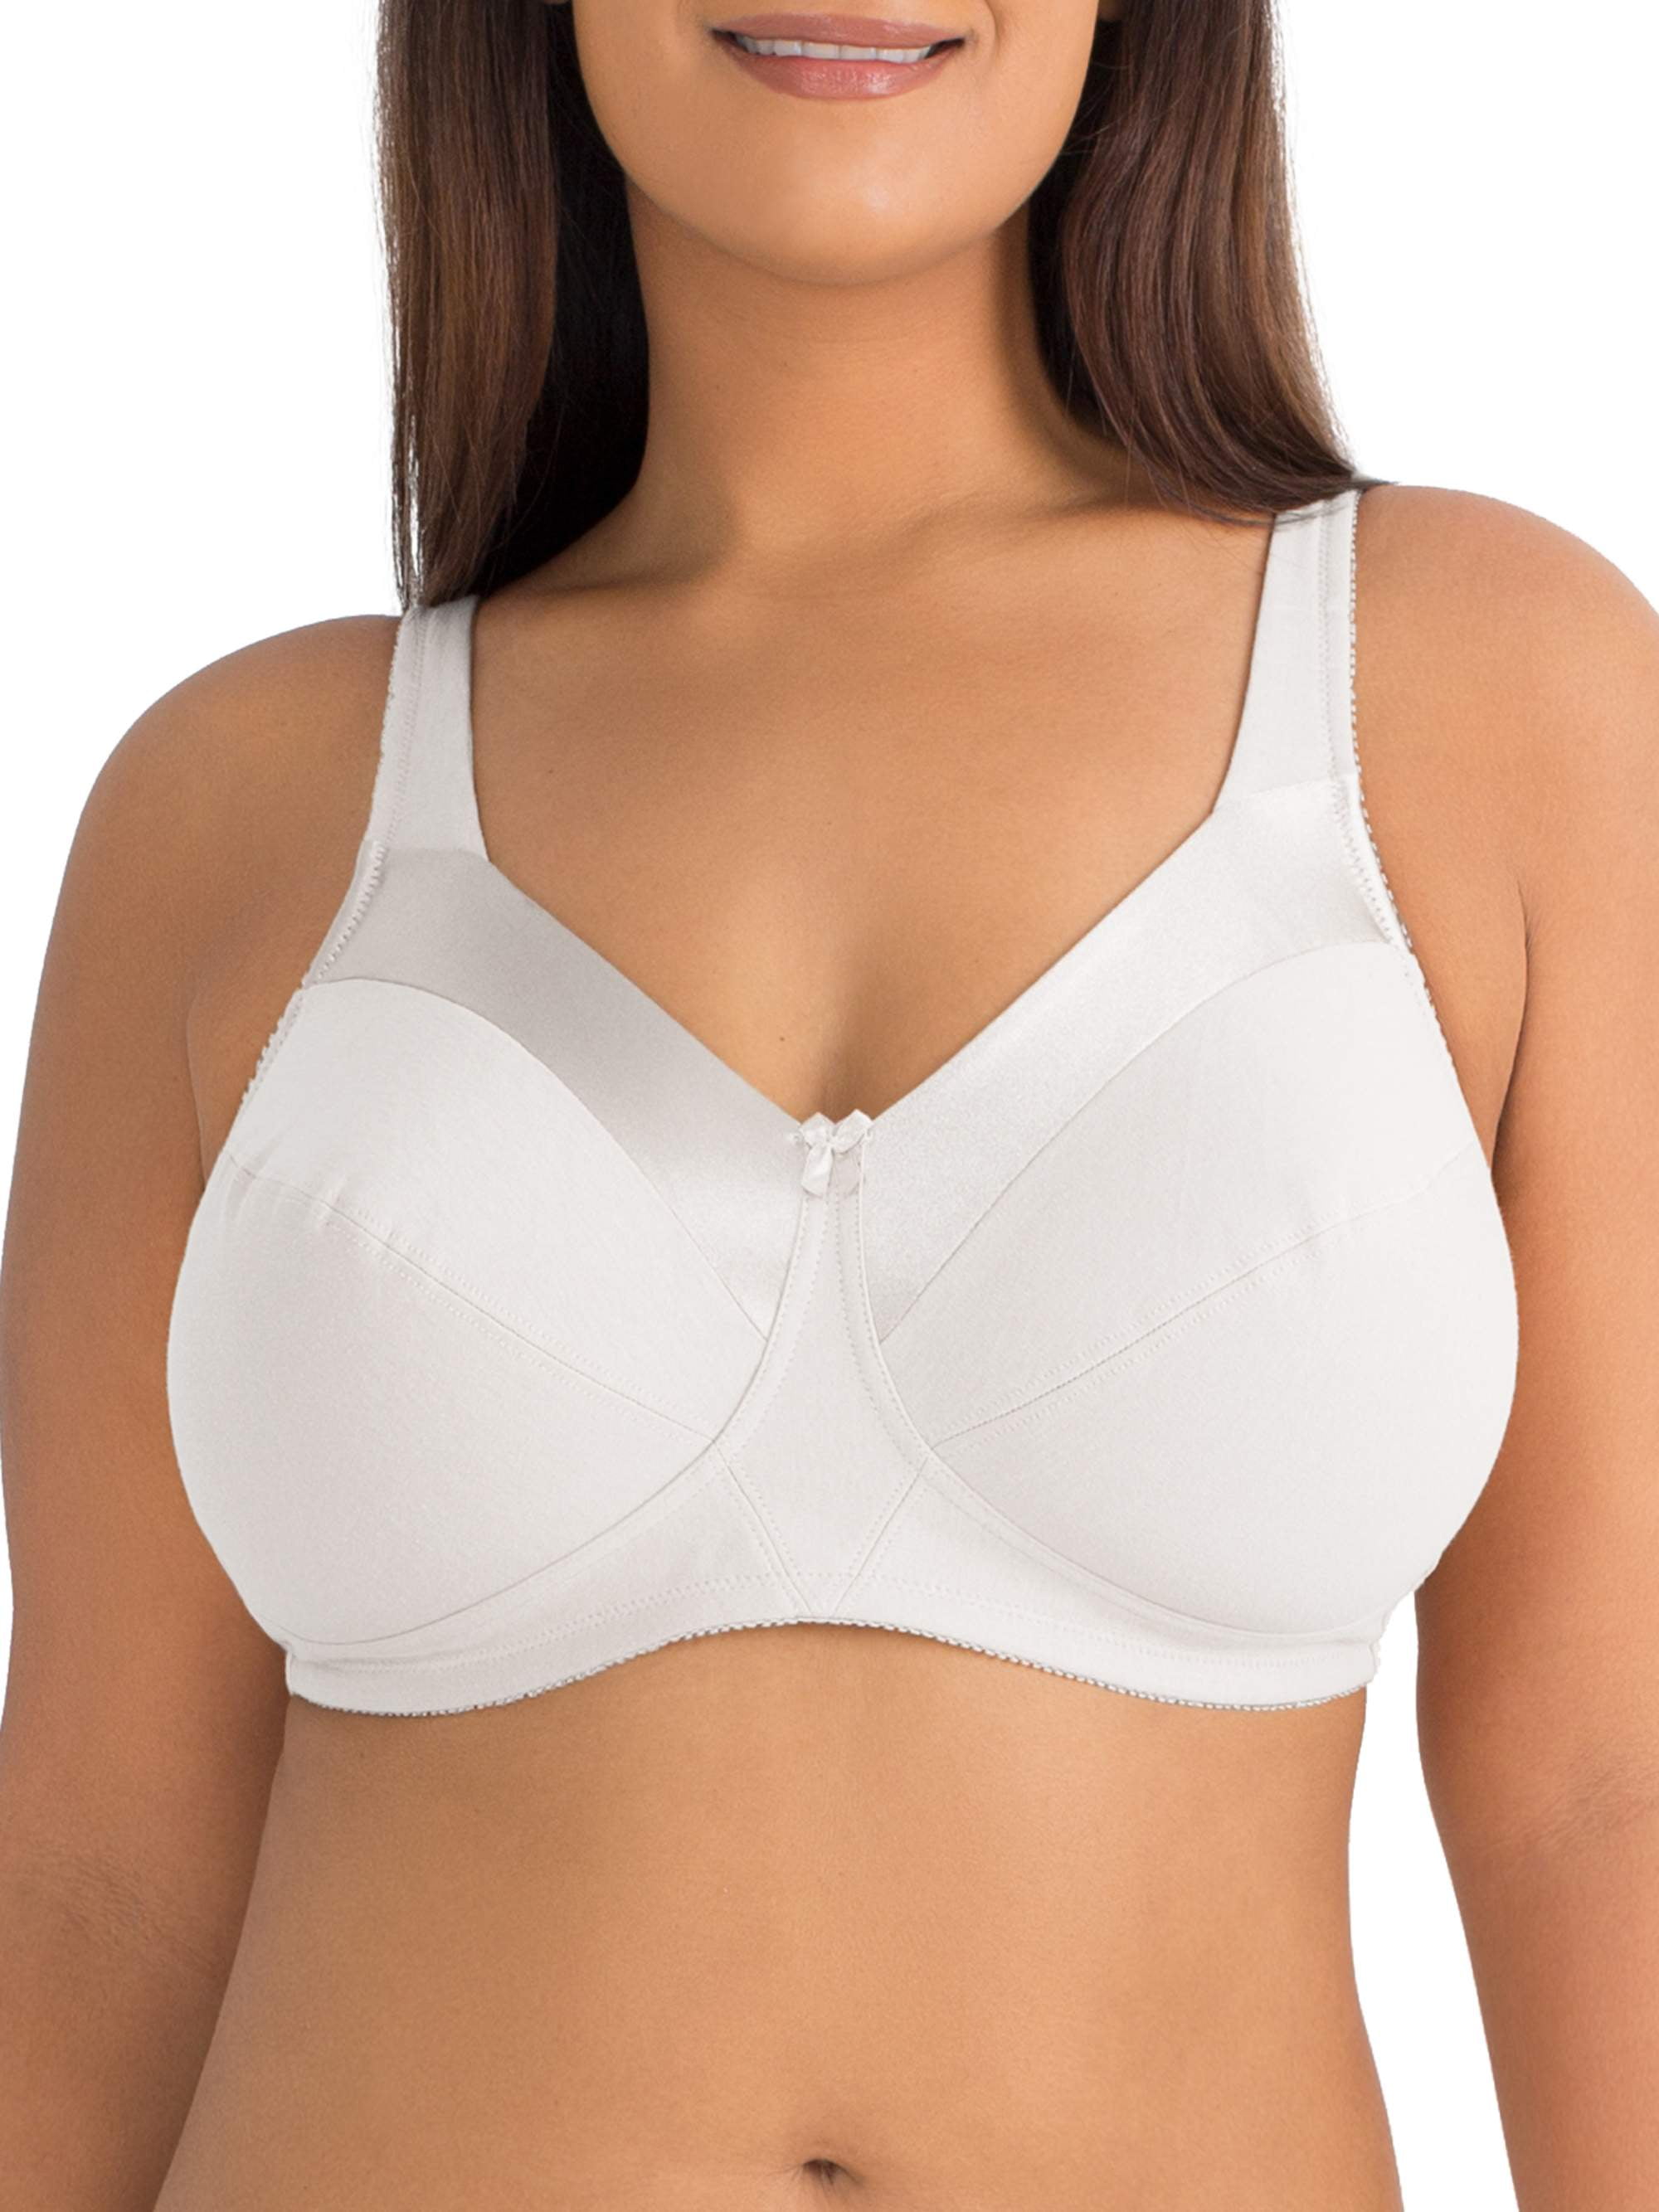 Fruit of the Loom Women's Seamless Wire Free Push-up Bra, White